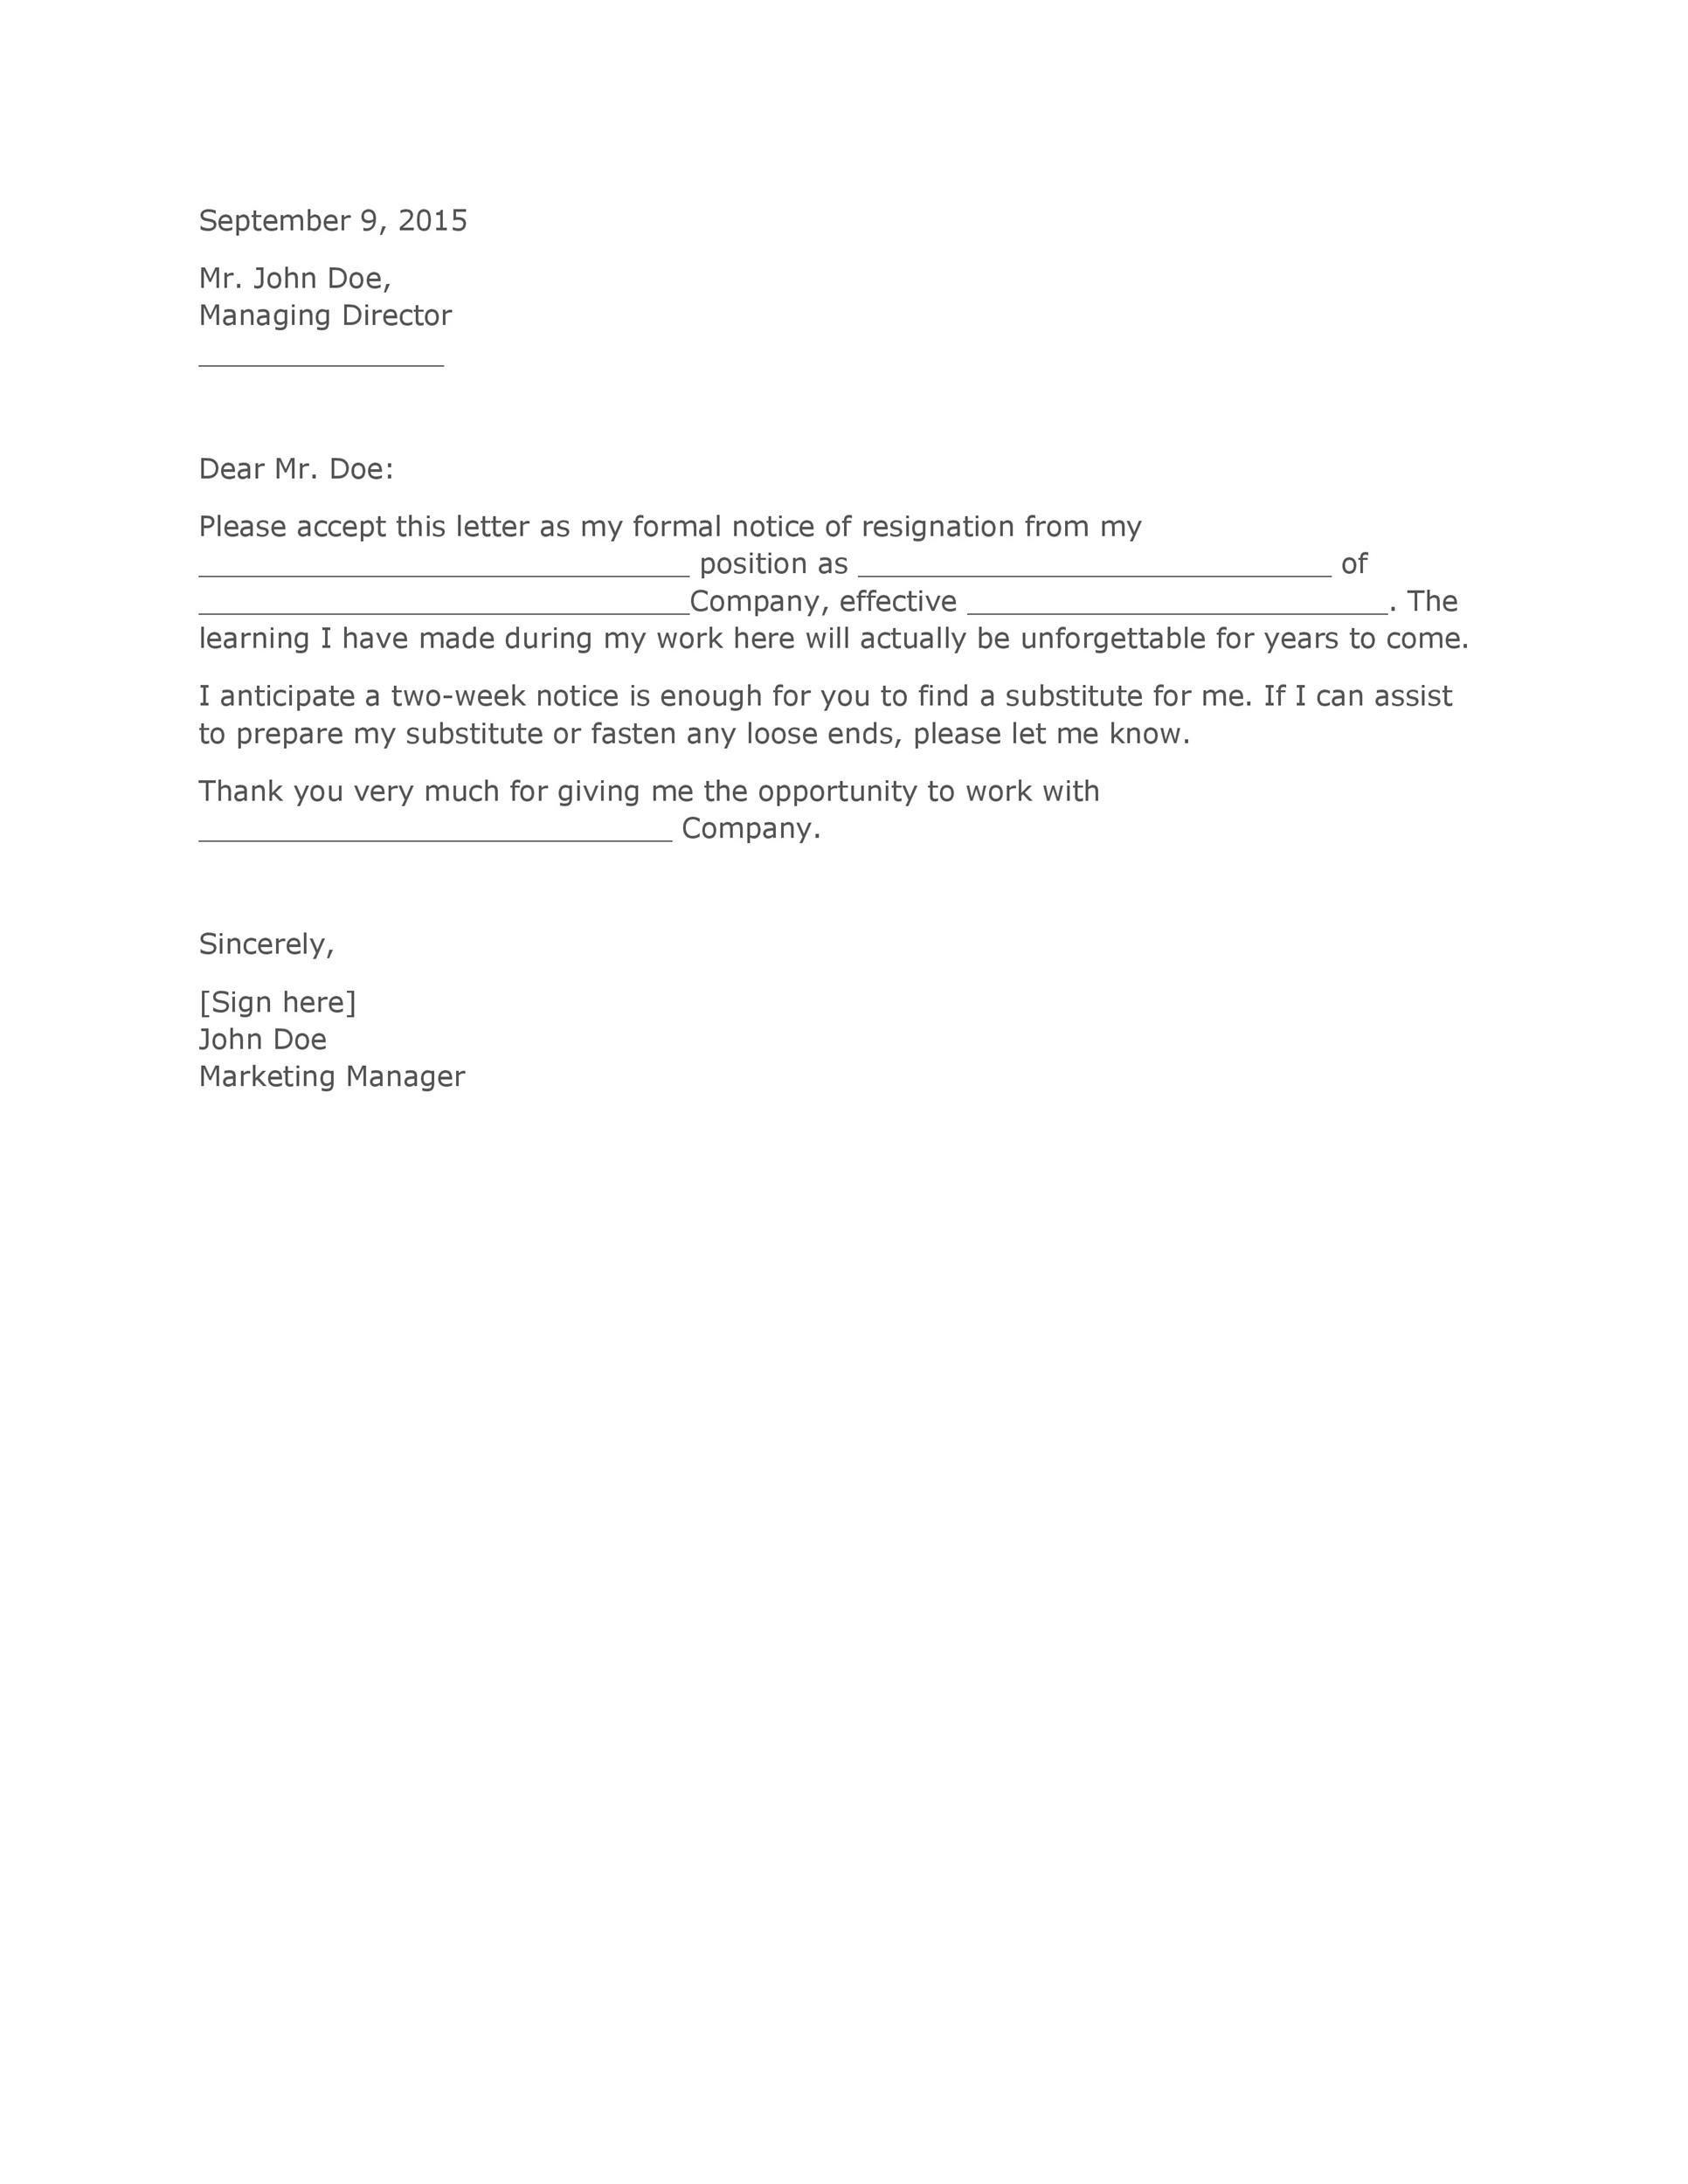 2 Weeks Notice Resignation Letter from templatelab.com